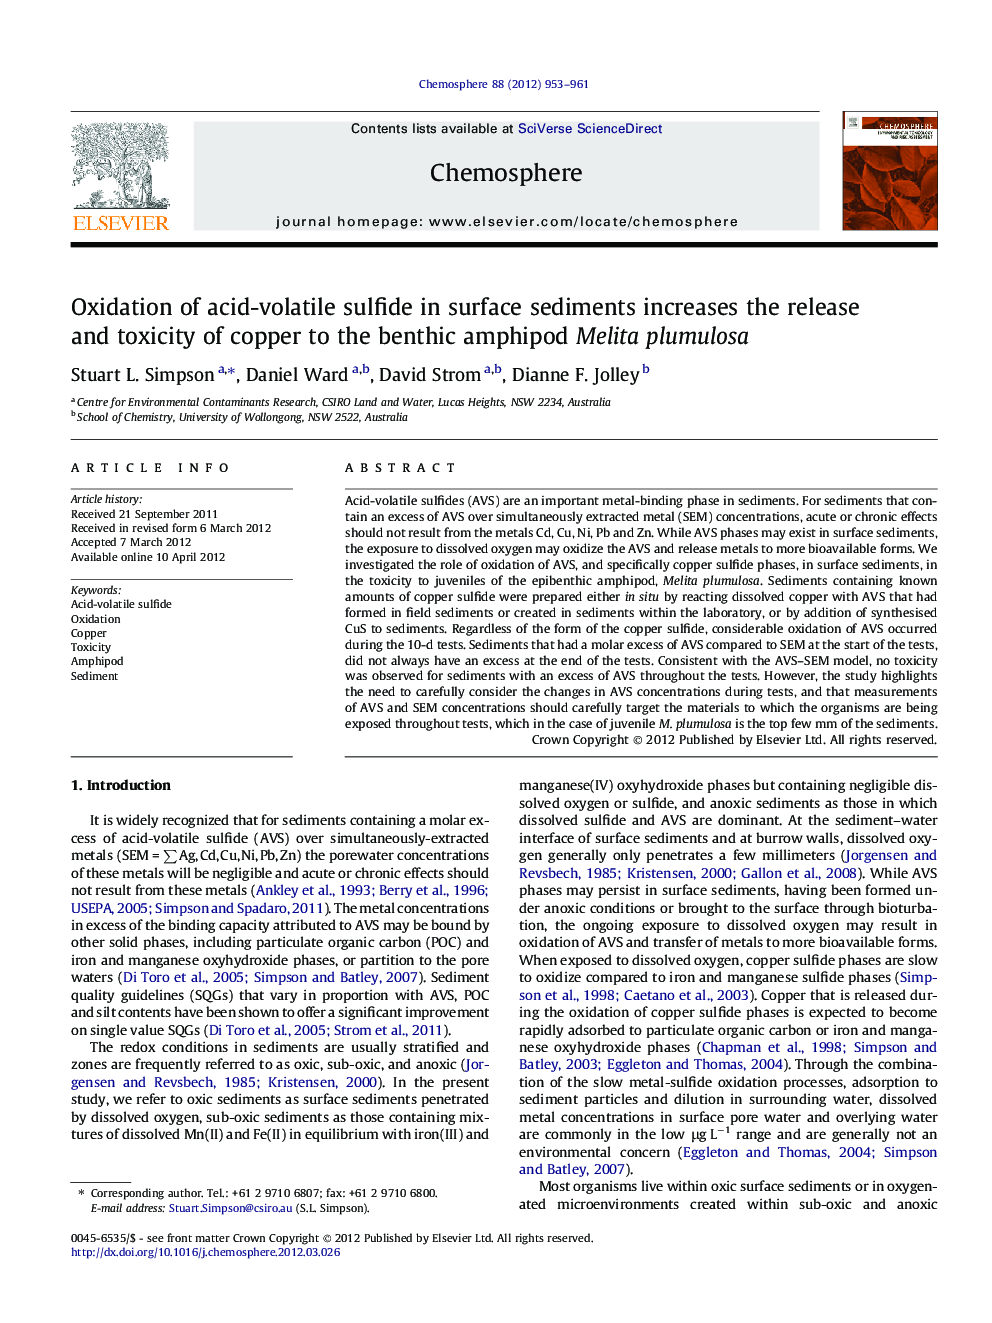 Oxidation of acid-volatile sulfide in surface sediments increases the release and toxicity of copper to the benthic amphipod Melita plumulosa